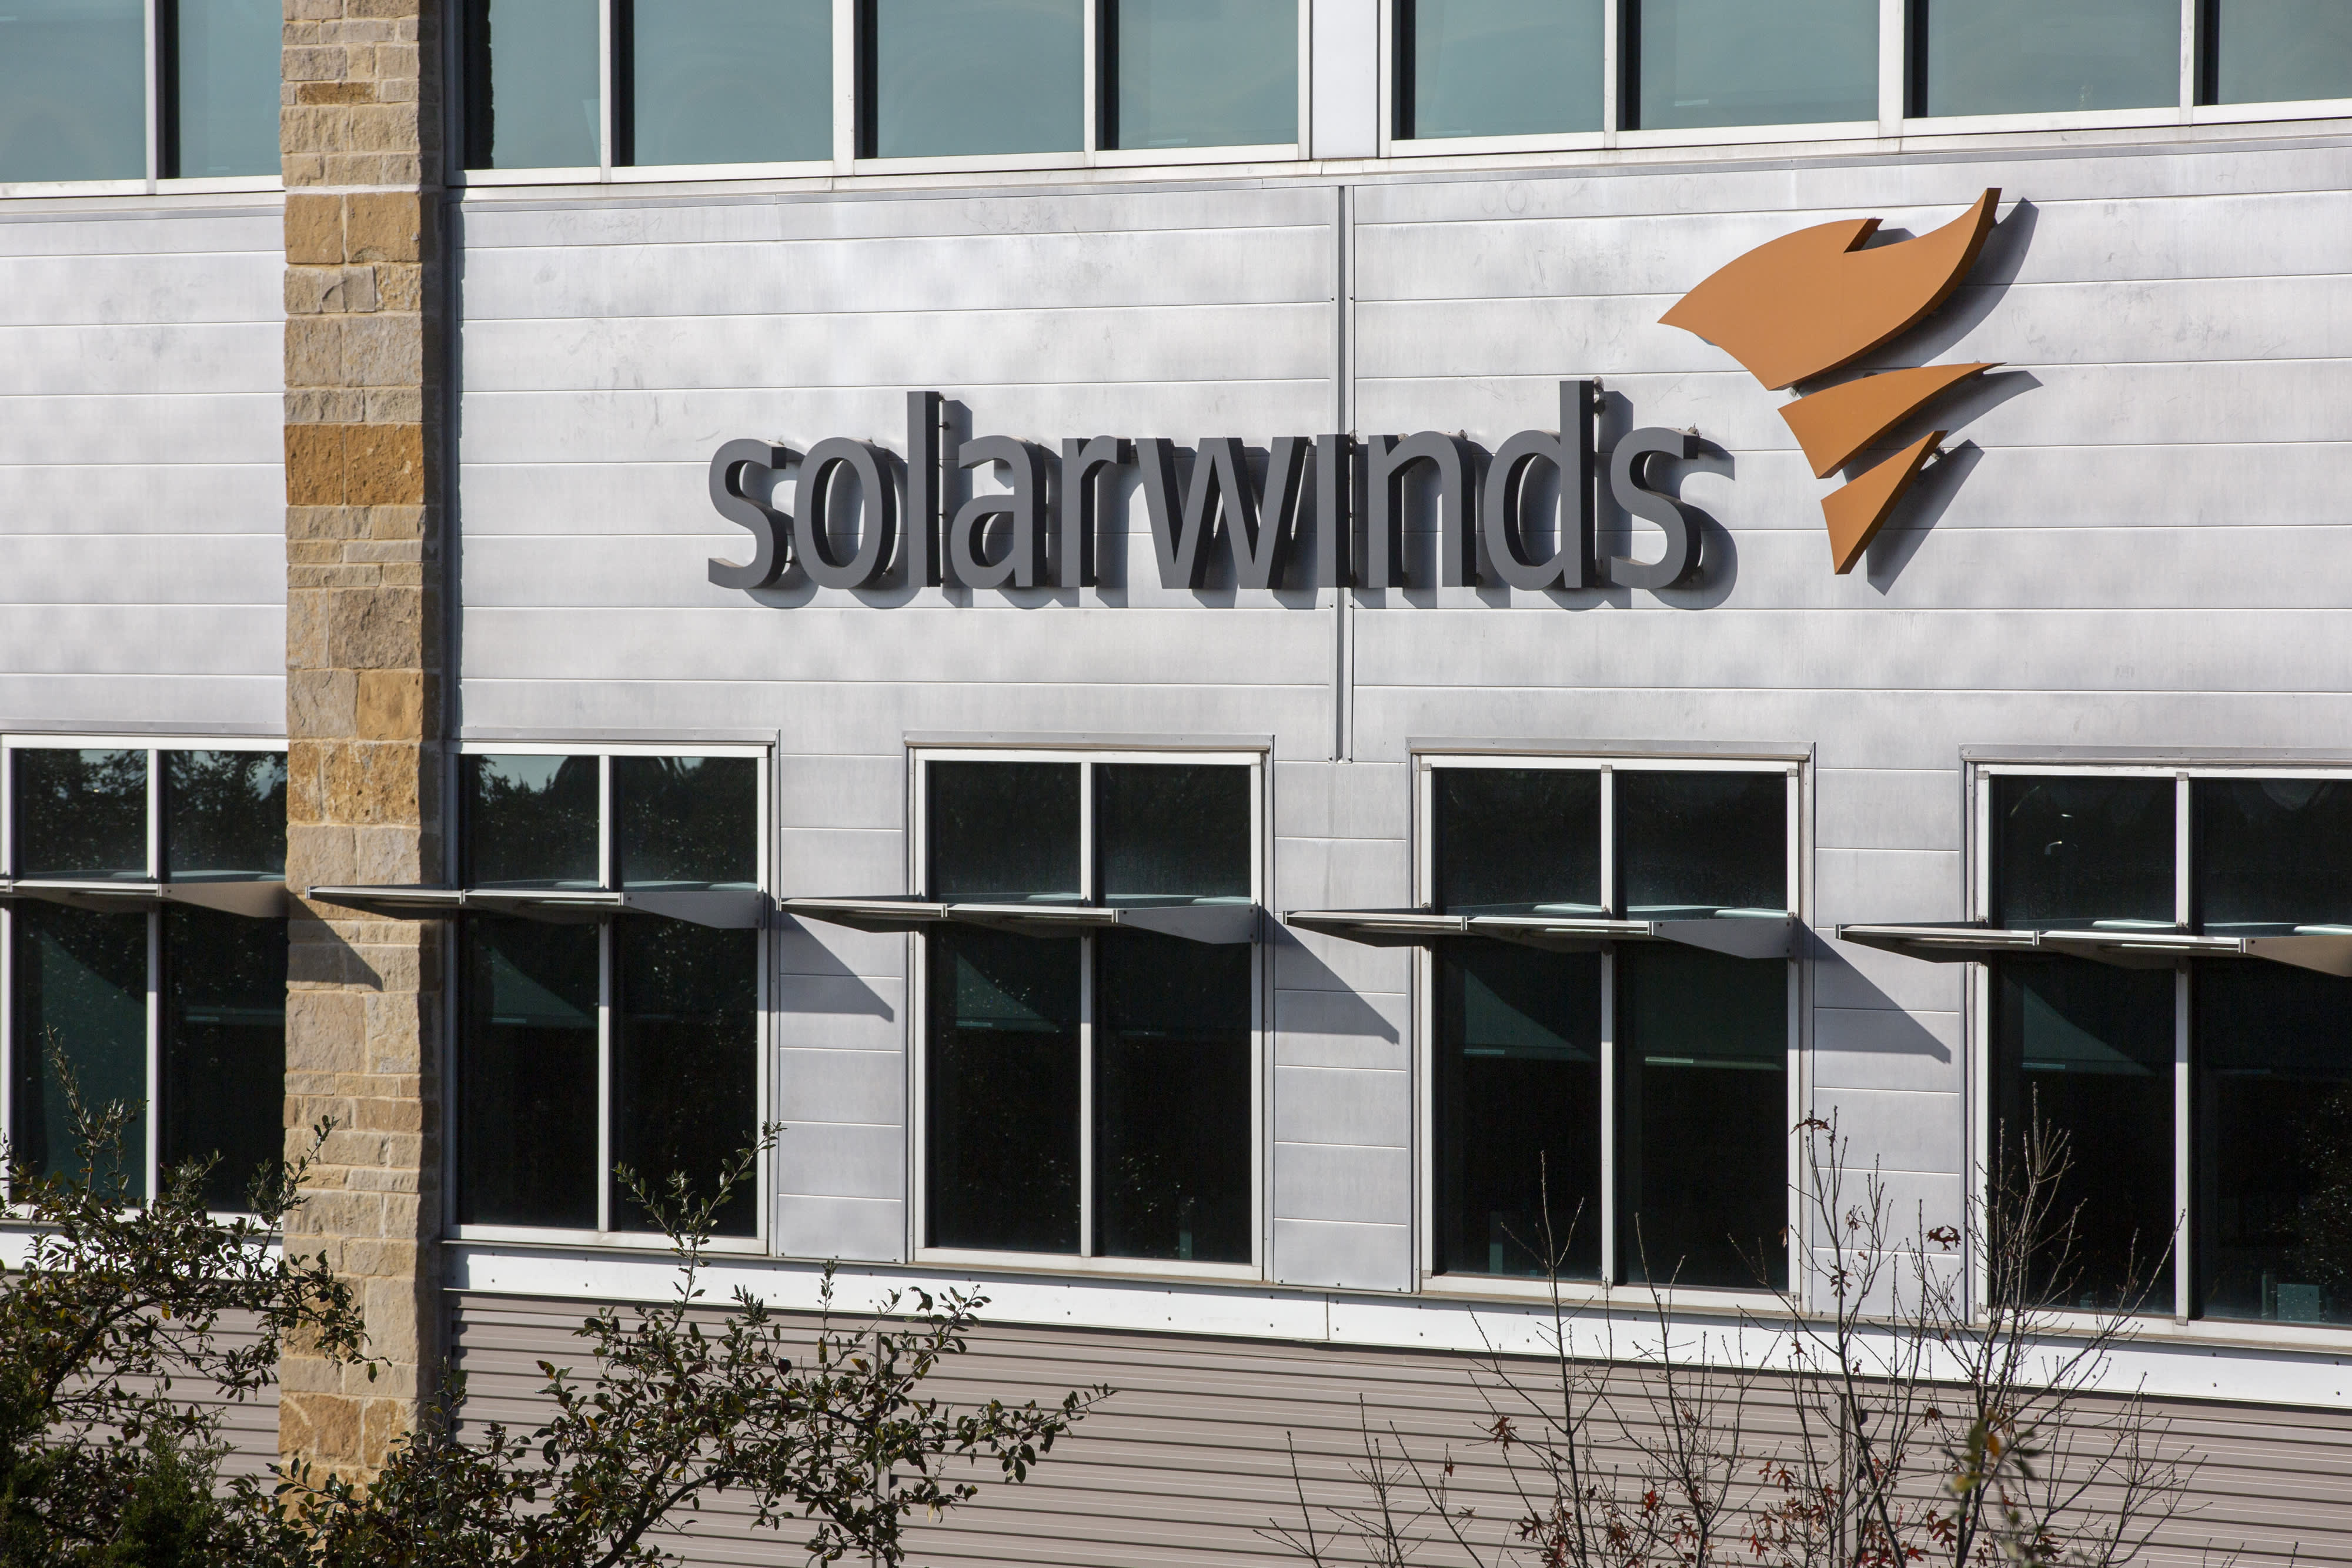 US agencies blame Russia for the solarwinds attack